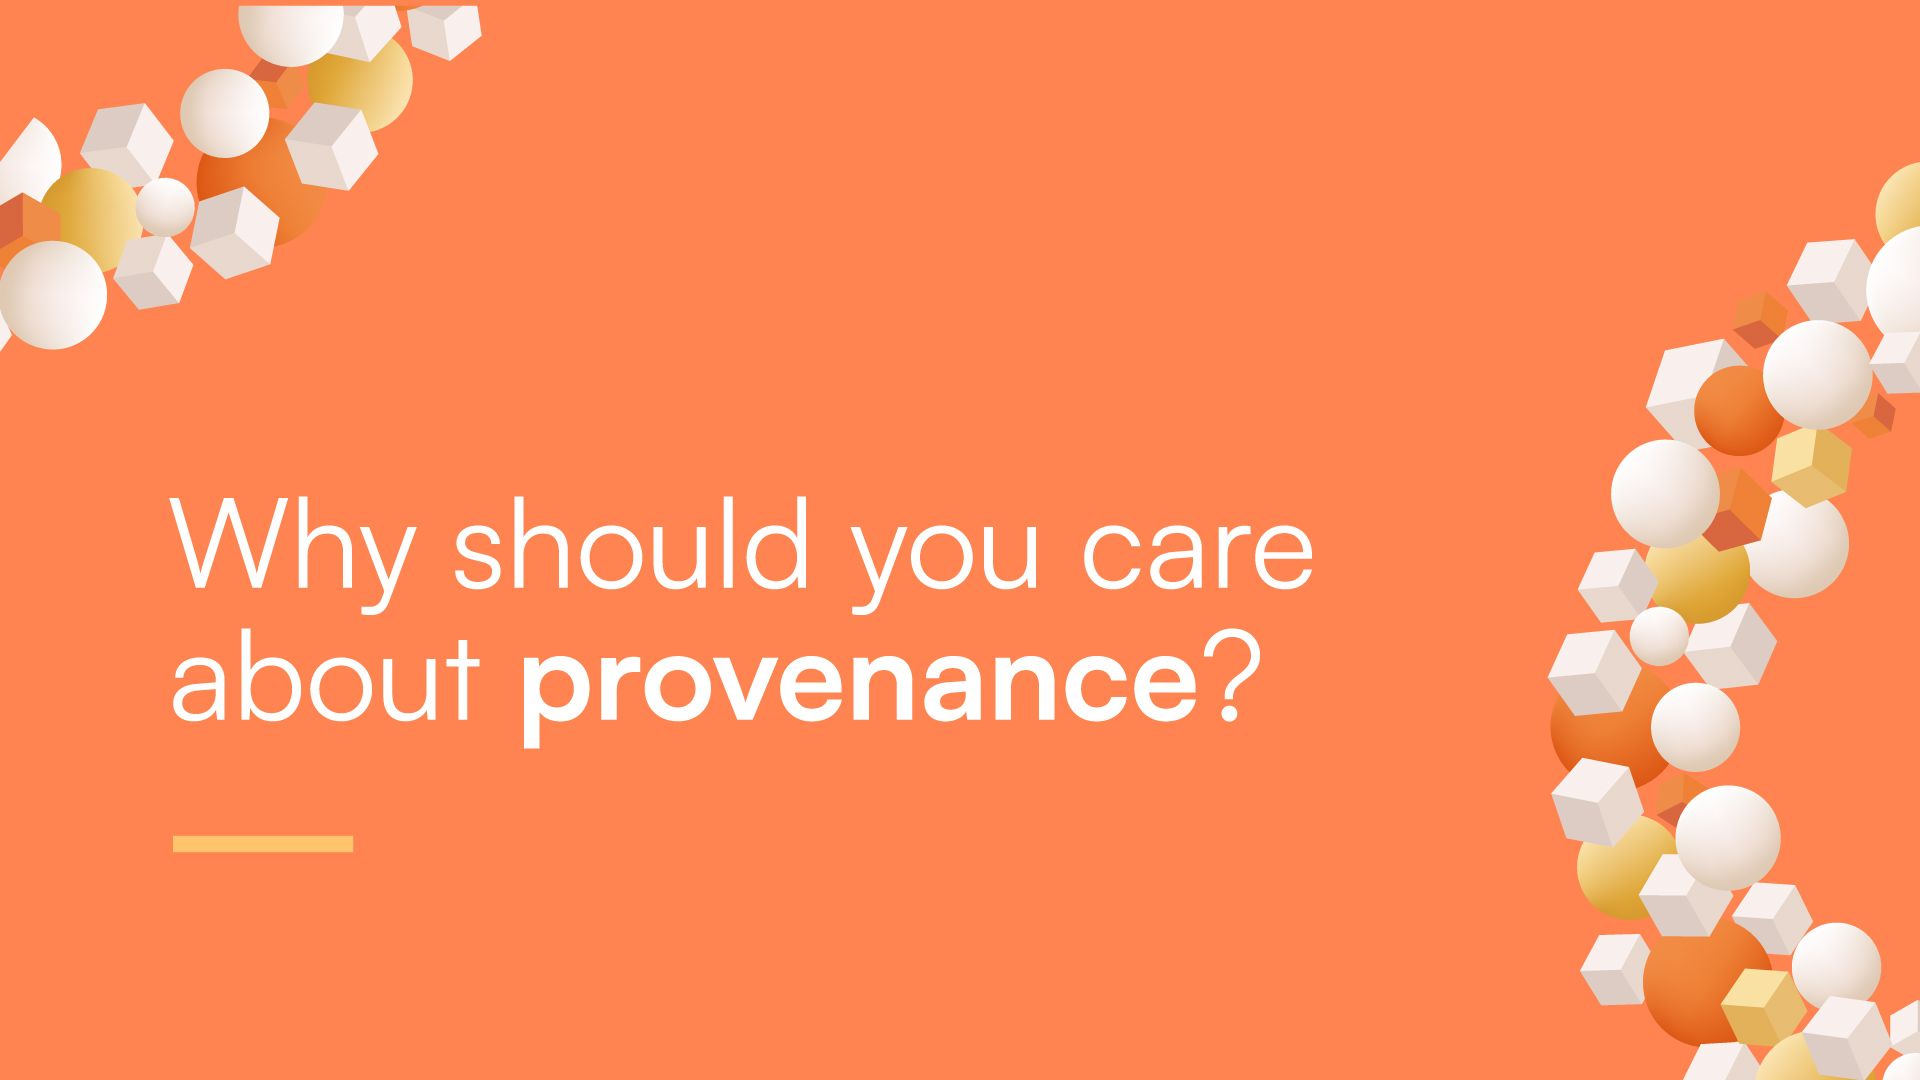 Why should you care about provenance?